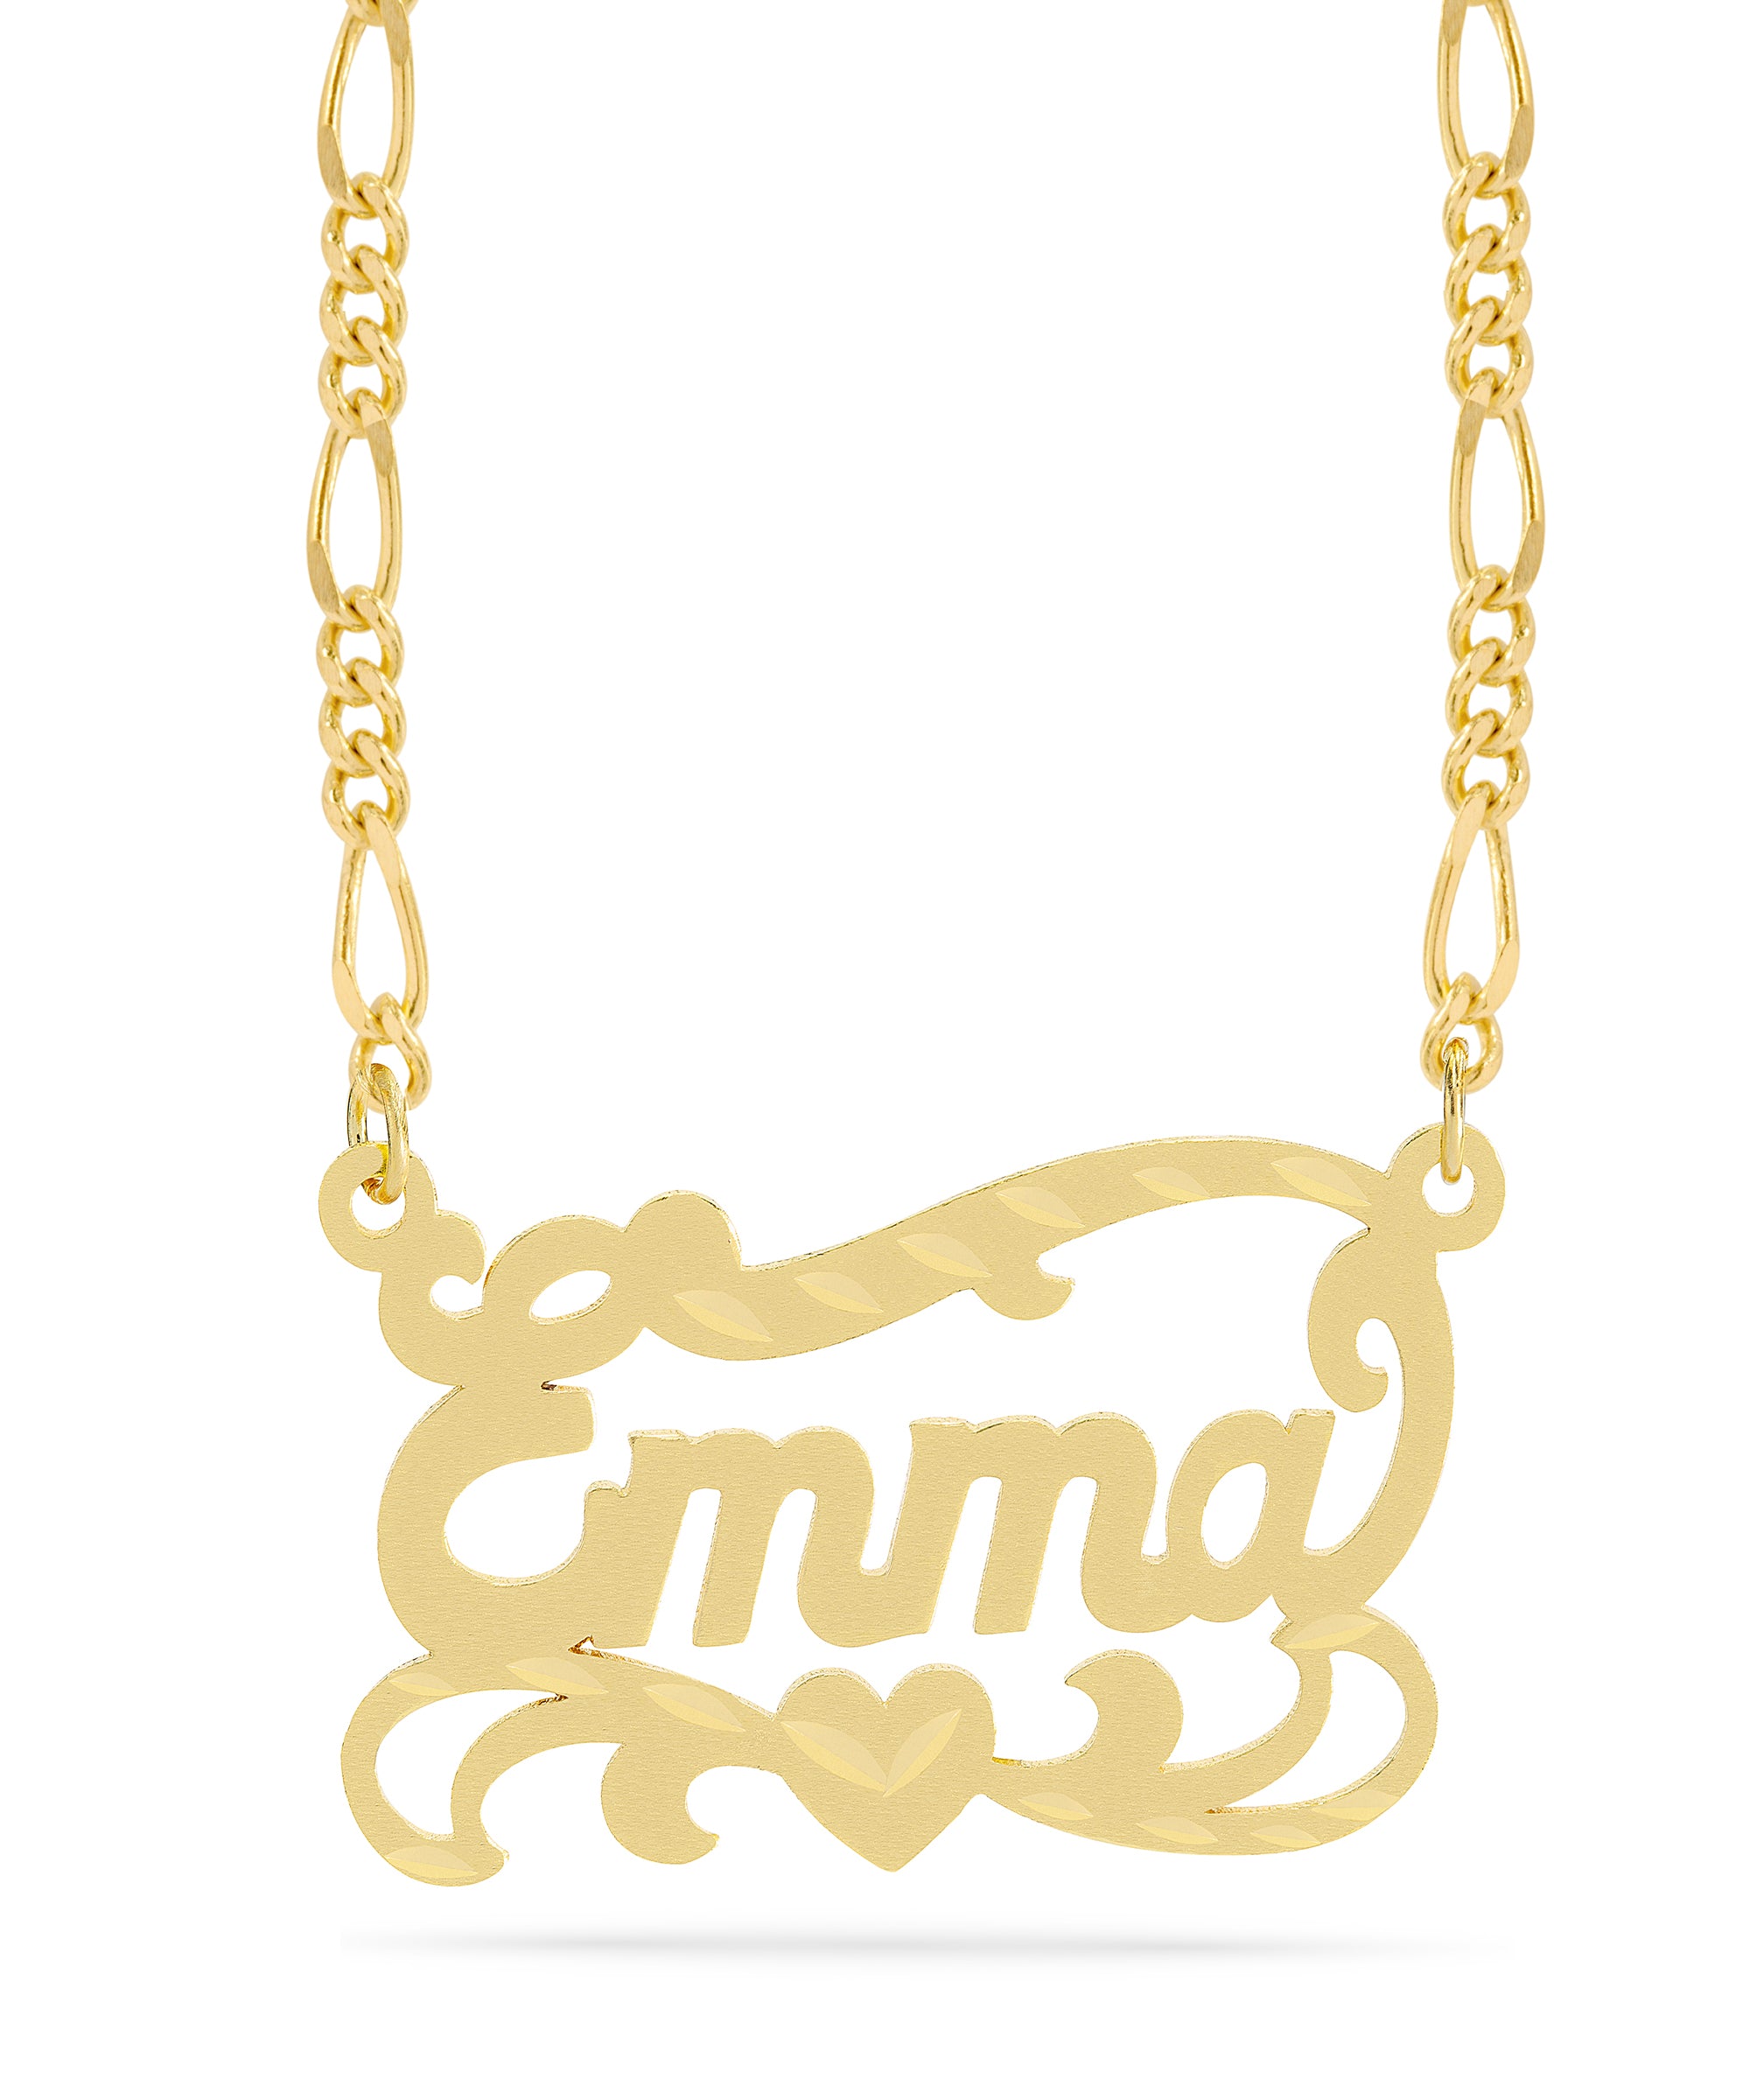 Personalized Name necklace with  Diamond Cut and Satin Finish "Emma"